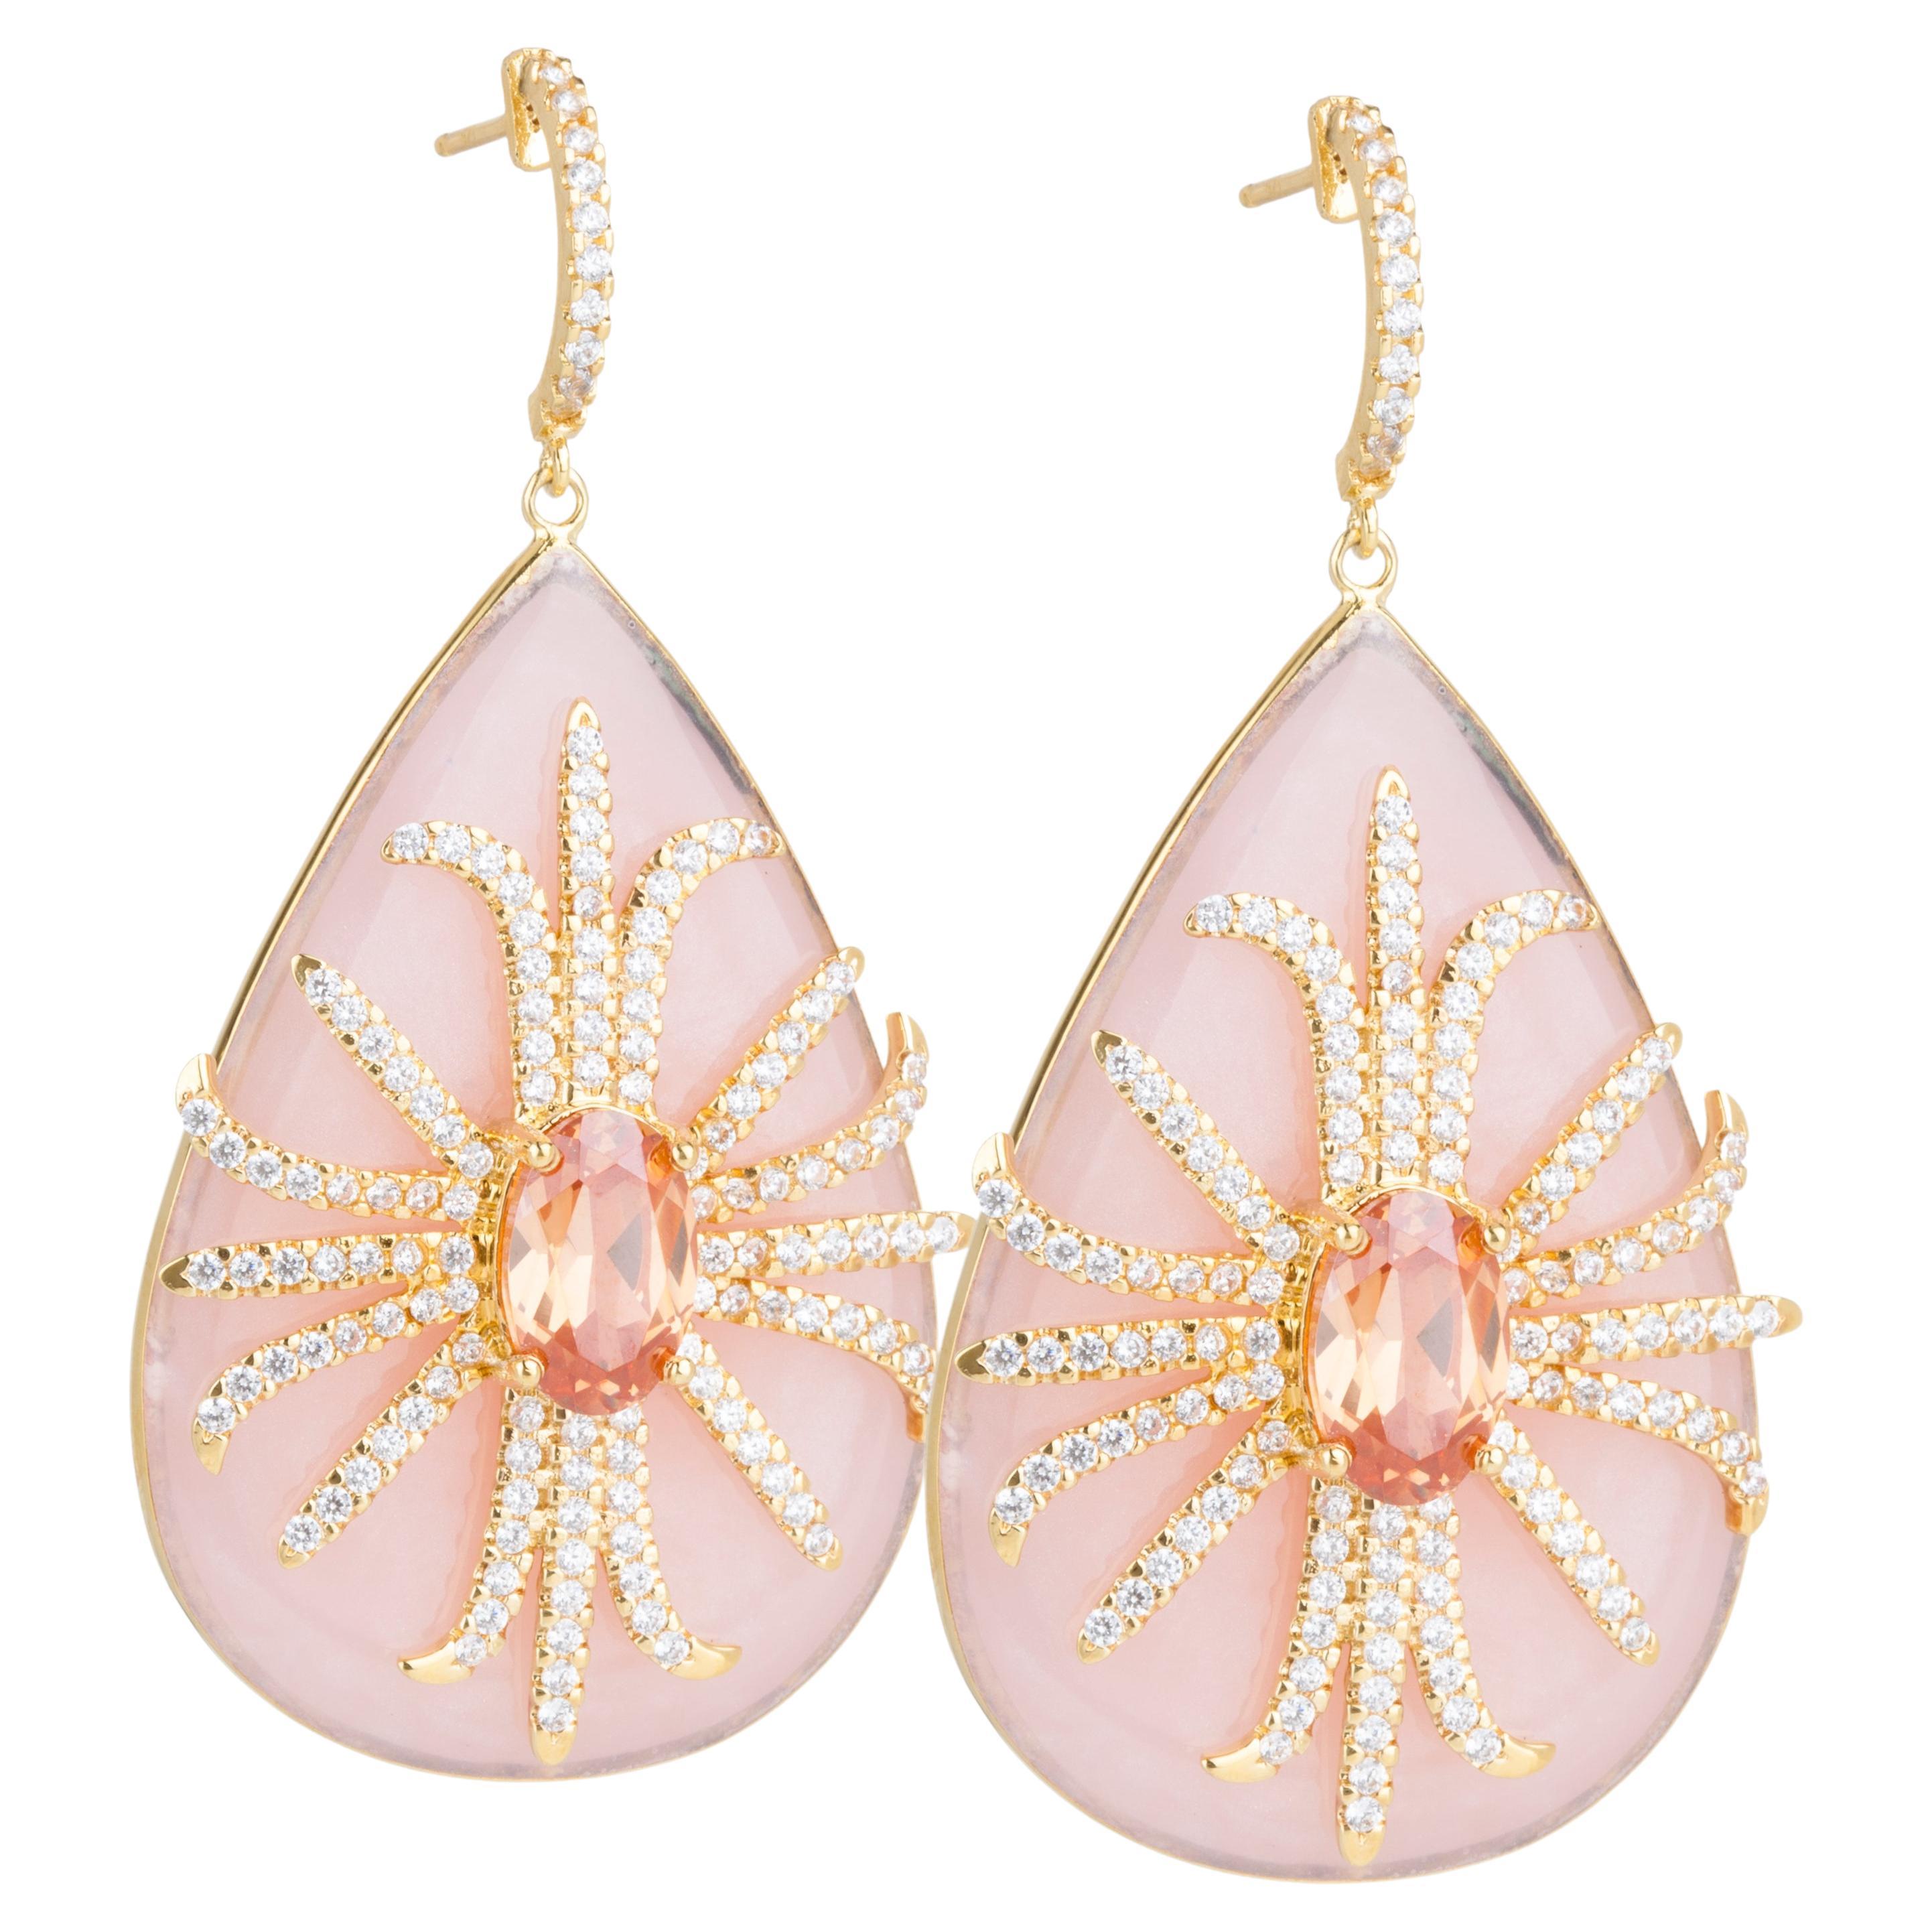 Miriam Salat Red Carpet Candy Pink Resin and Topaz Drop Earrings For Sale